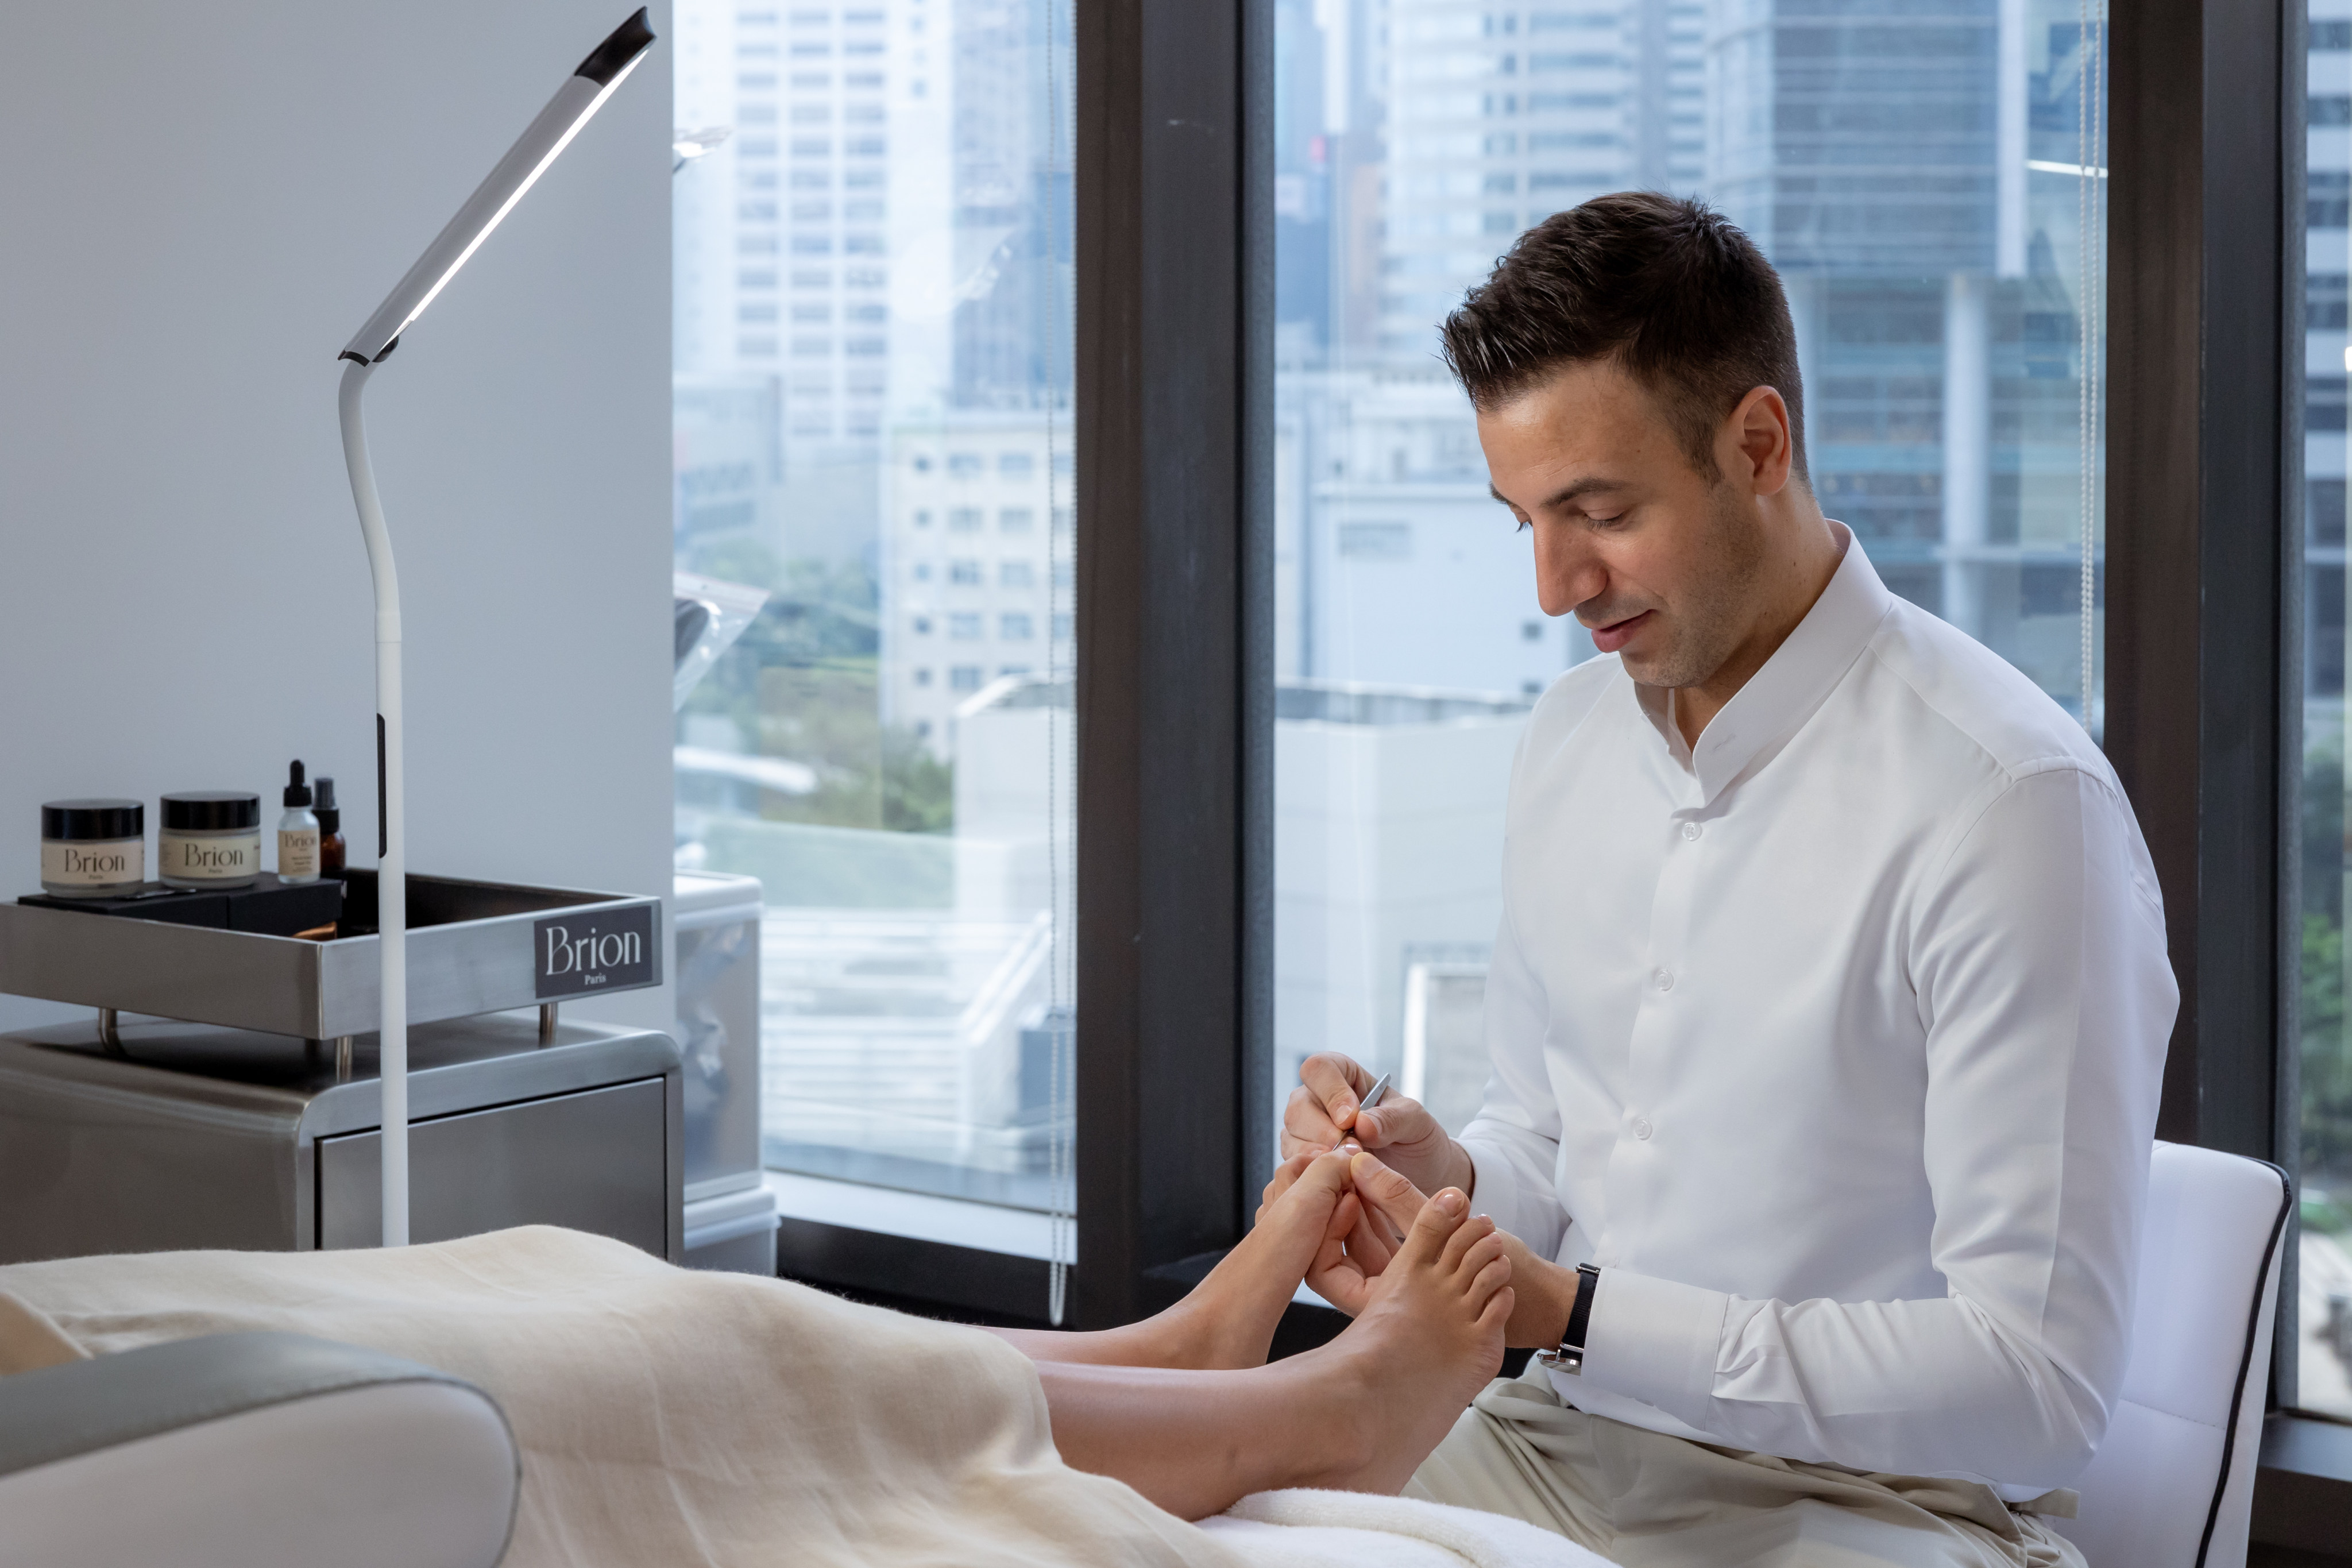 Footballer-turned-podiatrist Albin Brion treats clients at his newly opened Foot Atelier in Hong Kong. Photo: Handout